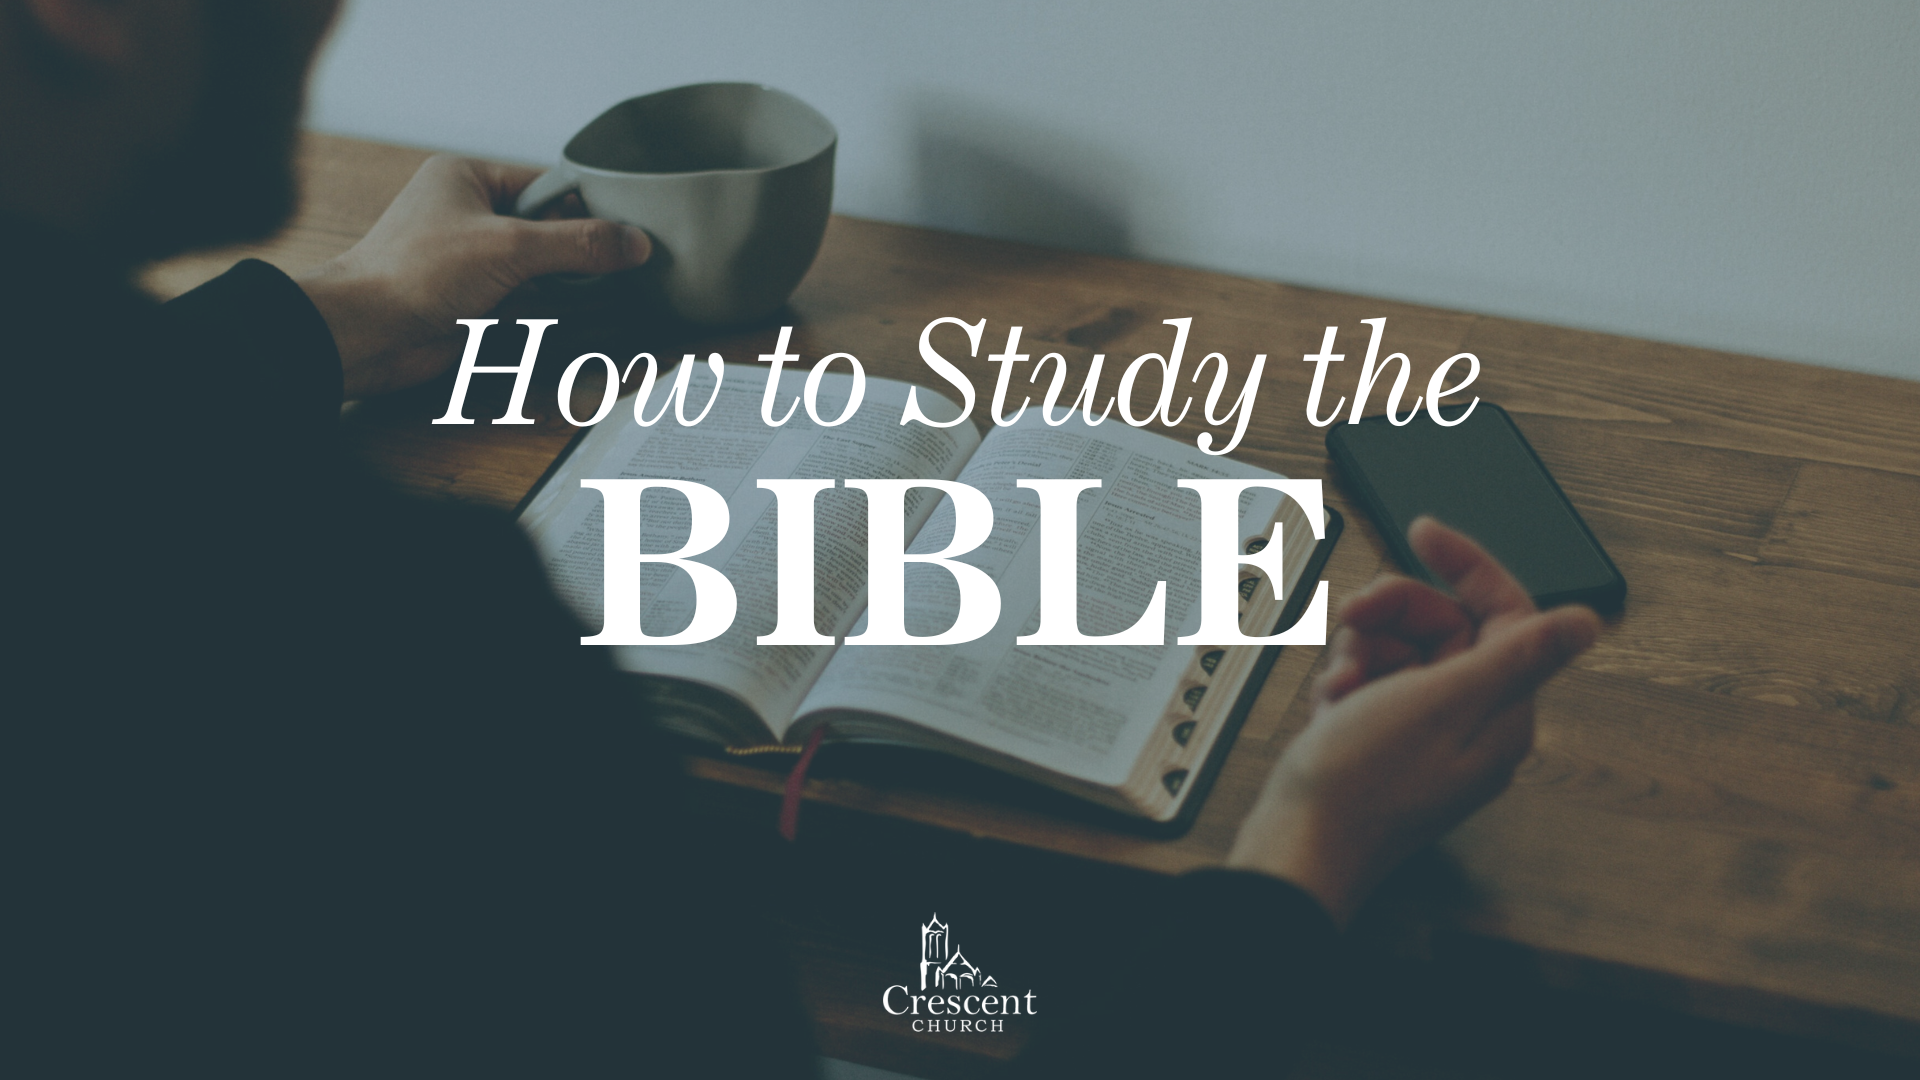 How to Study an Old Testament Narrative